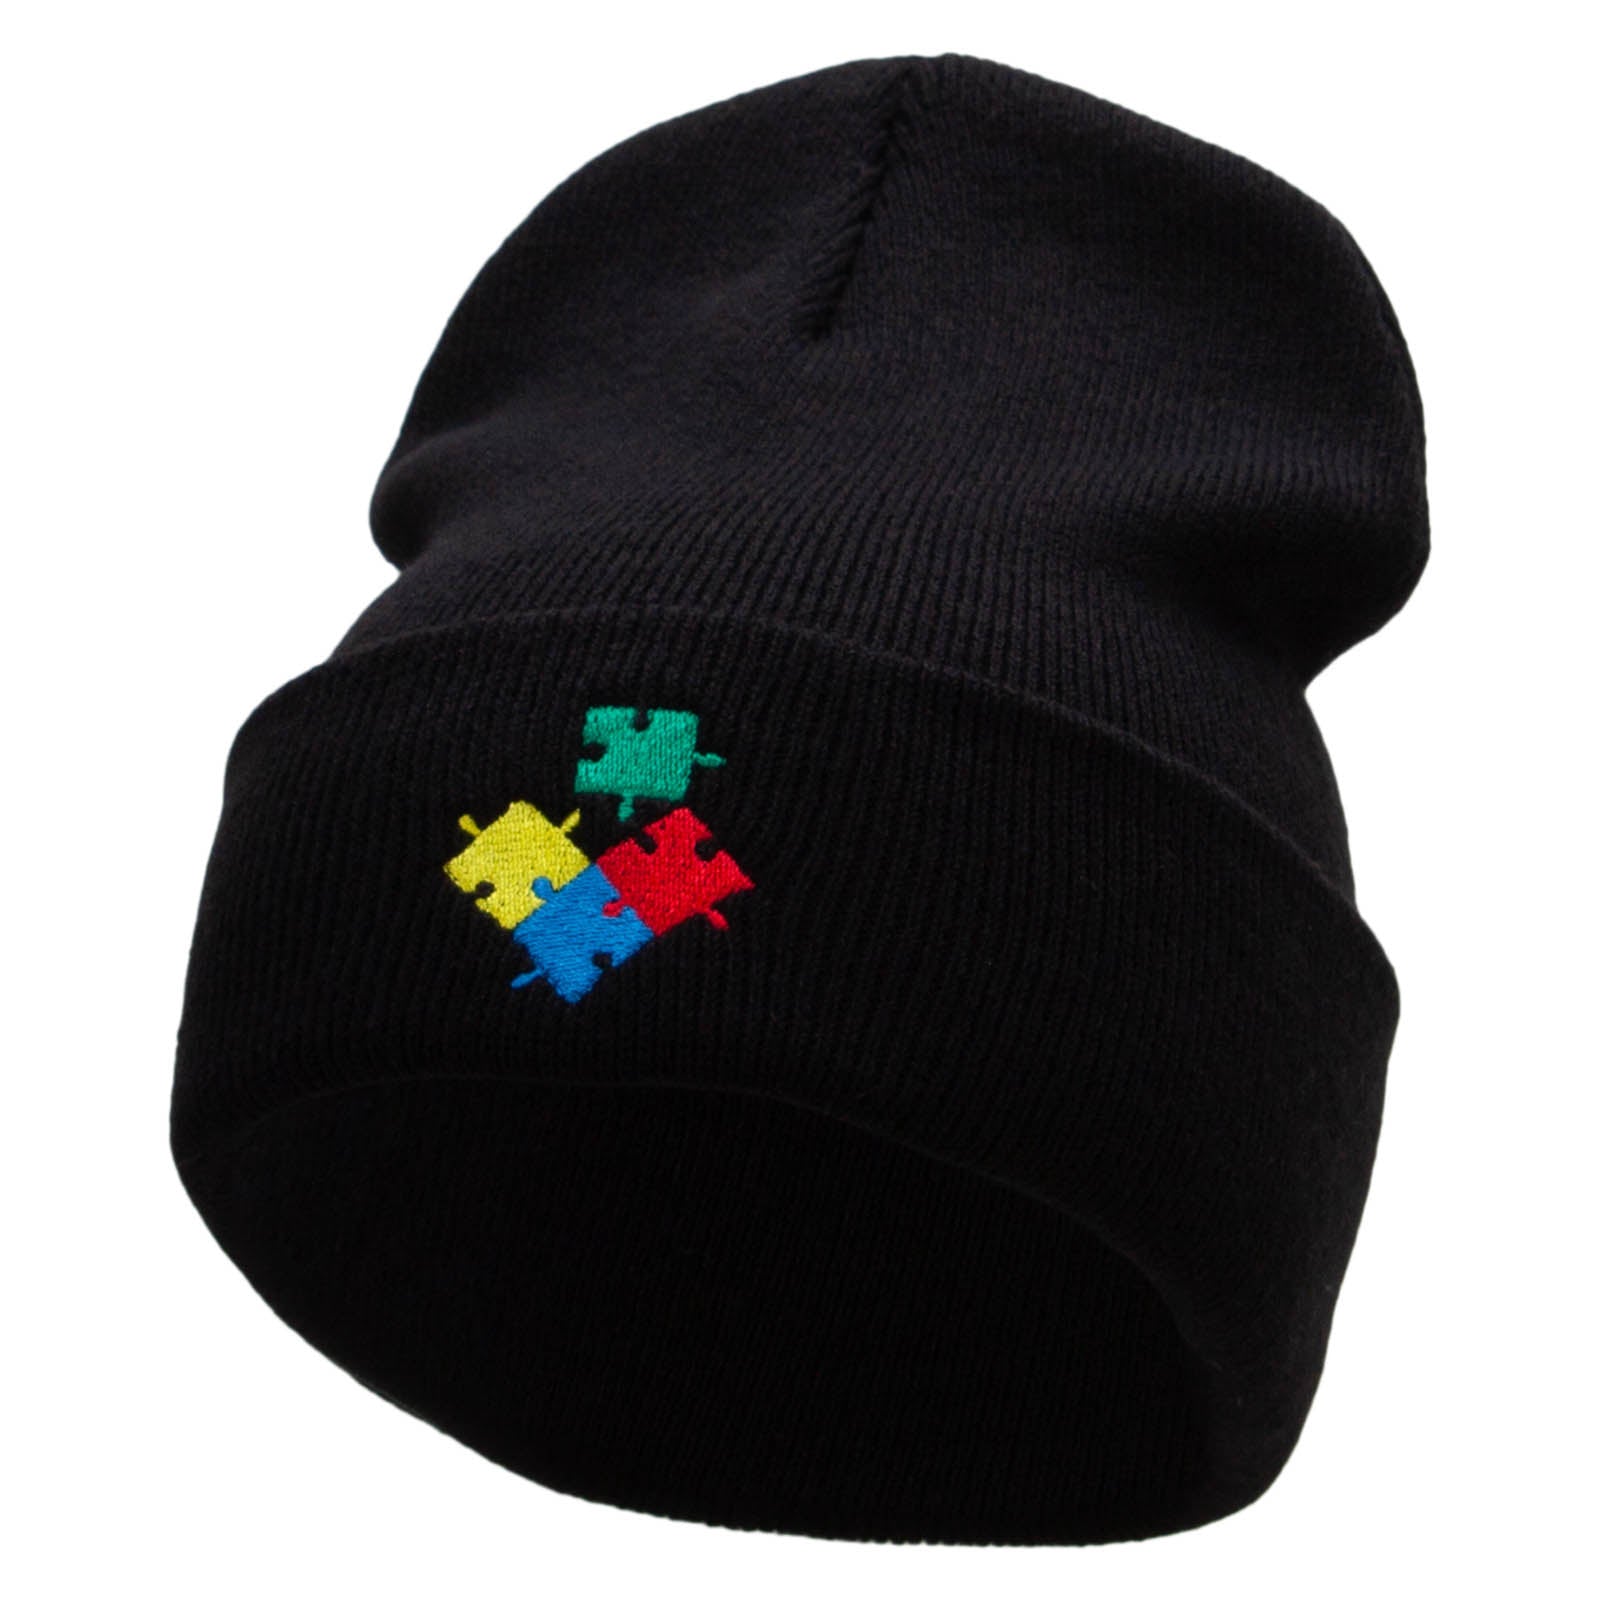 Puzzle Embroidered 12 Inch Long Knitted Beanie - Black OSFM